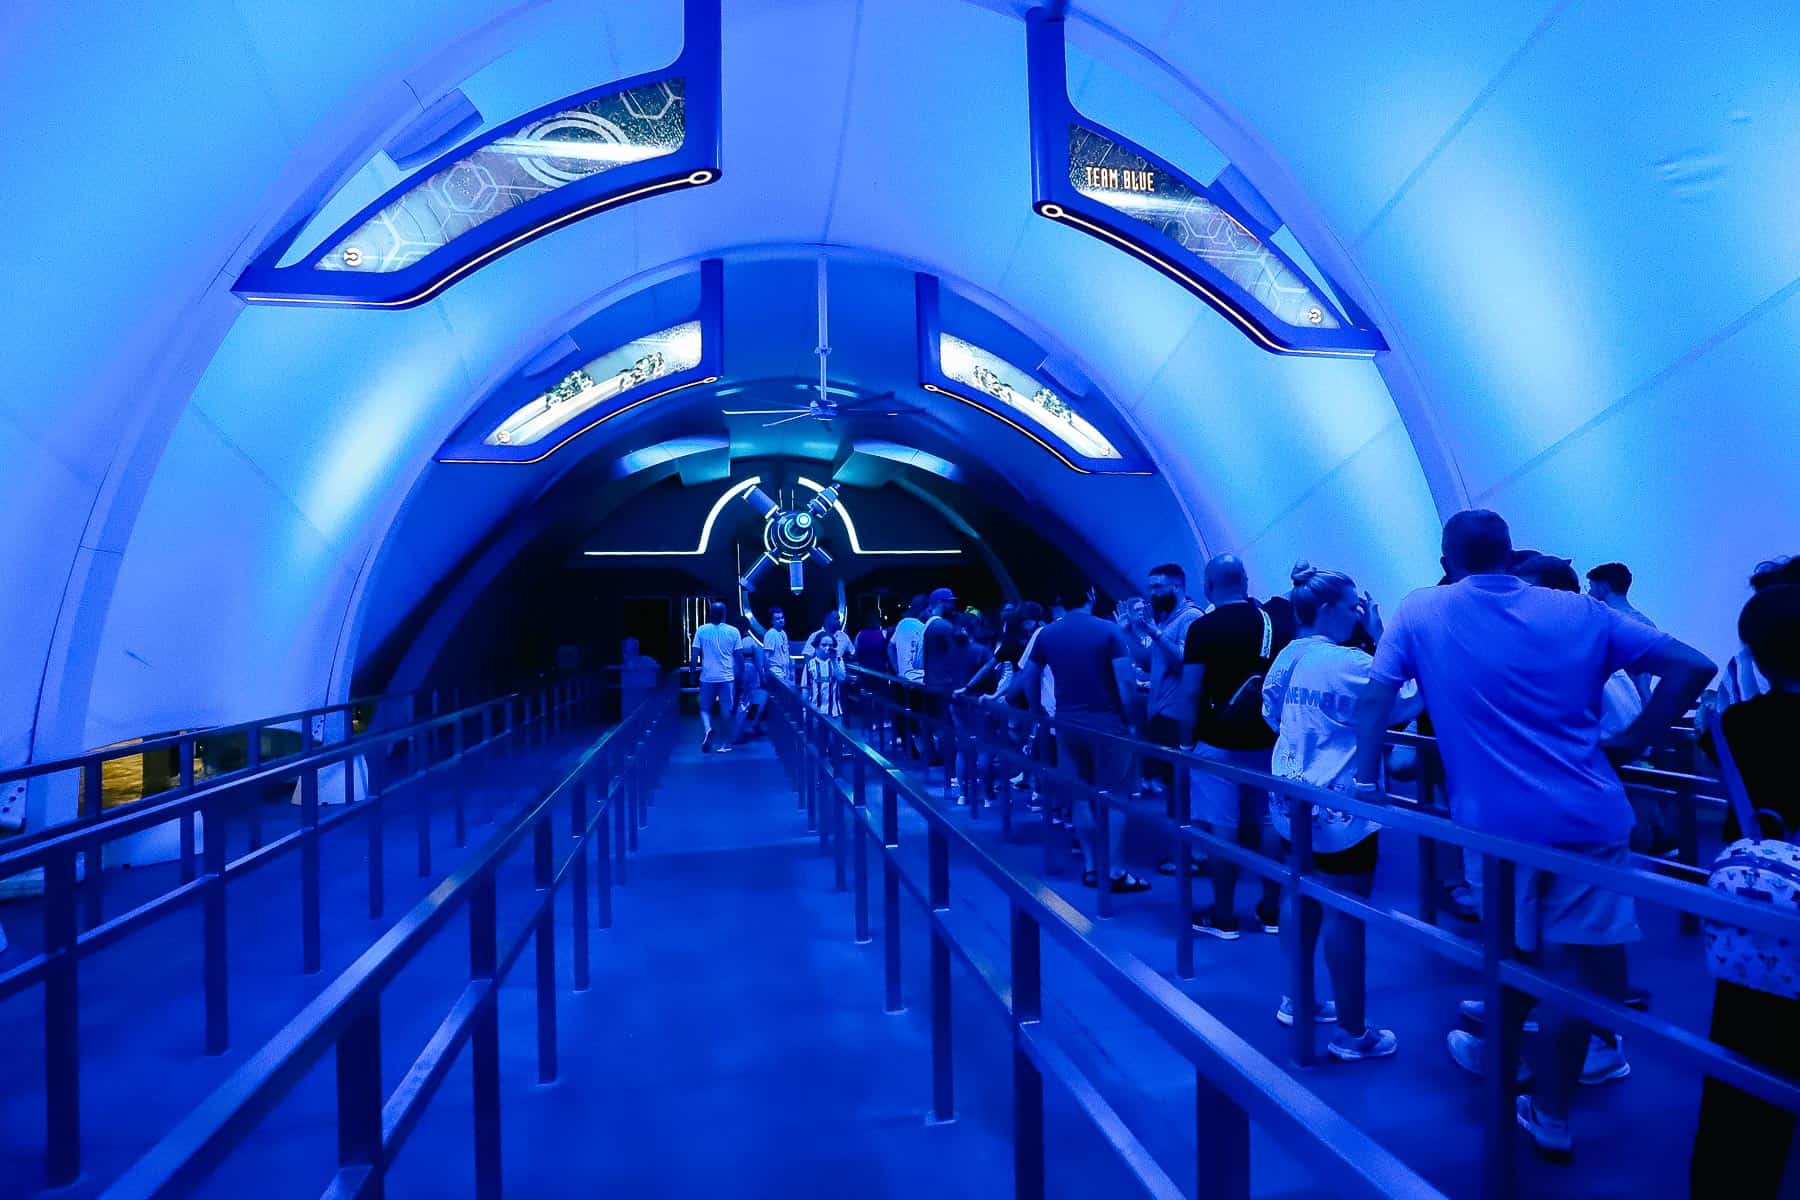 Guests waiting in the queue to experience Tron Lightcycle Run. 